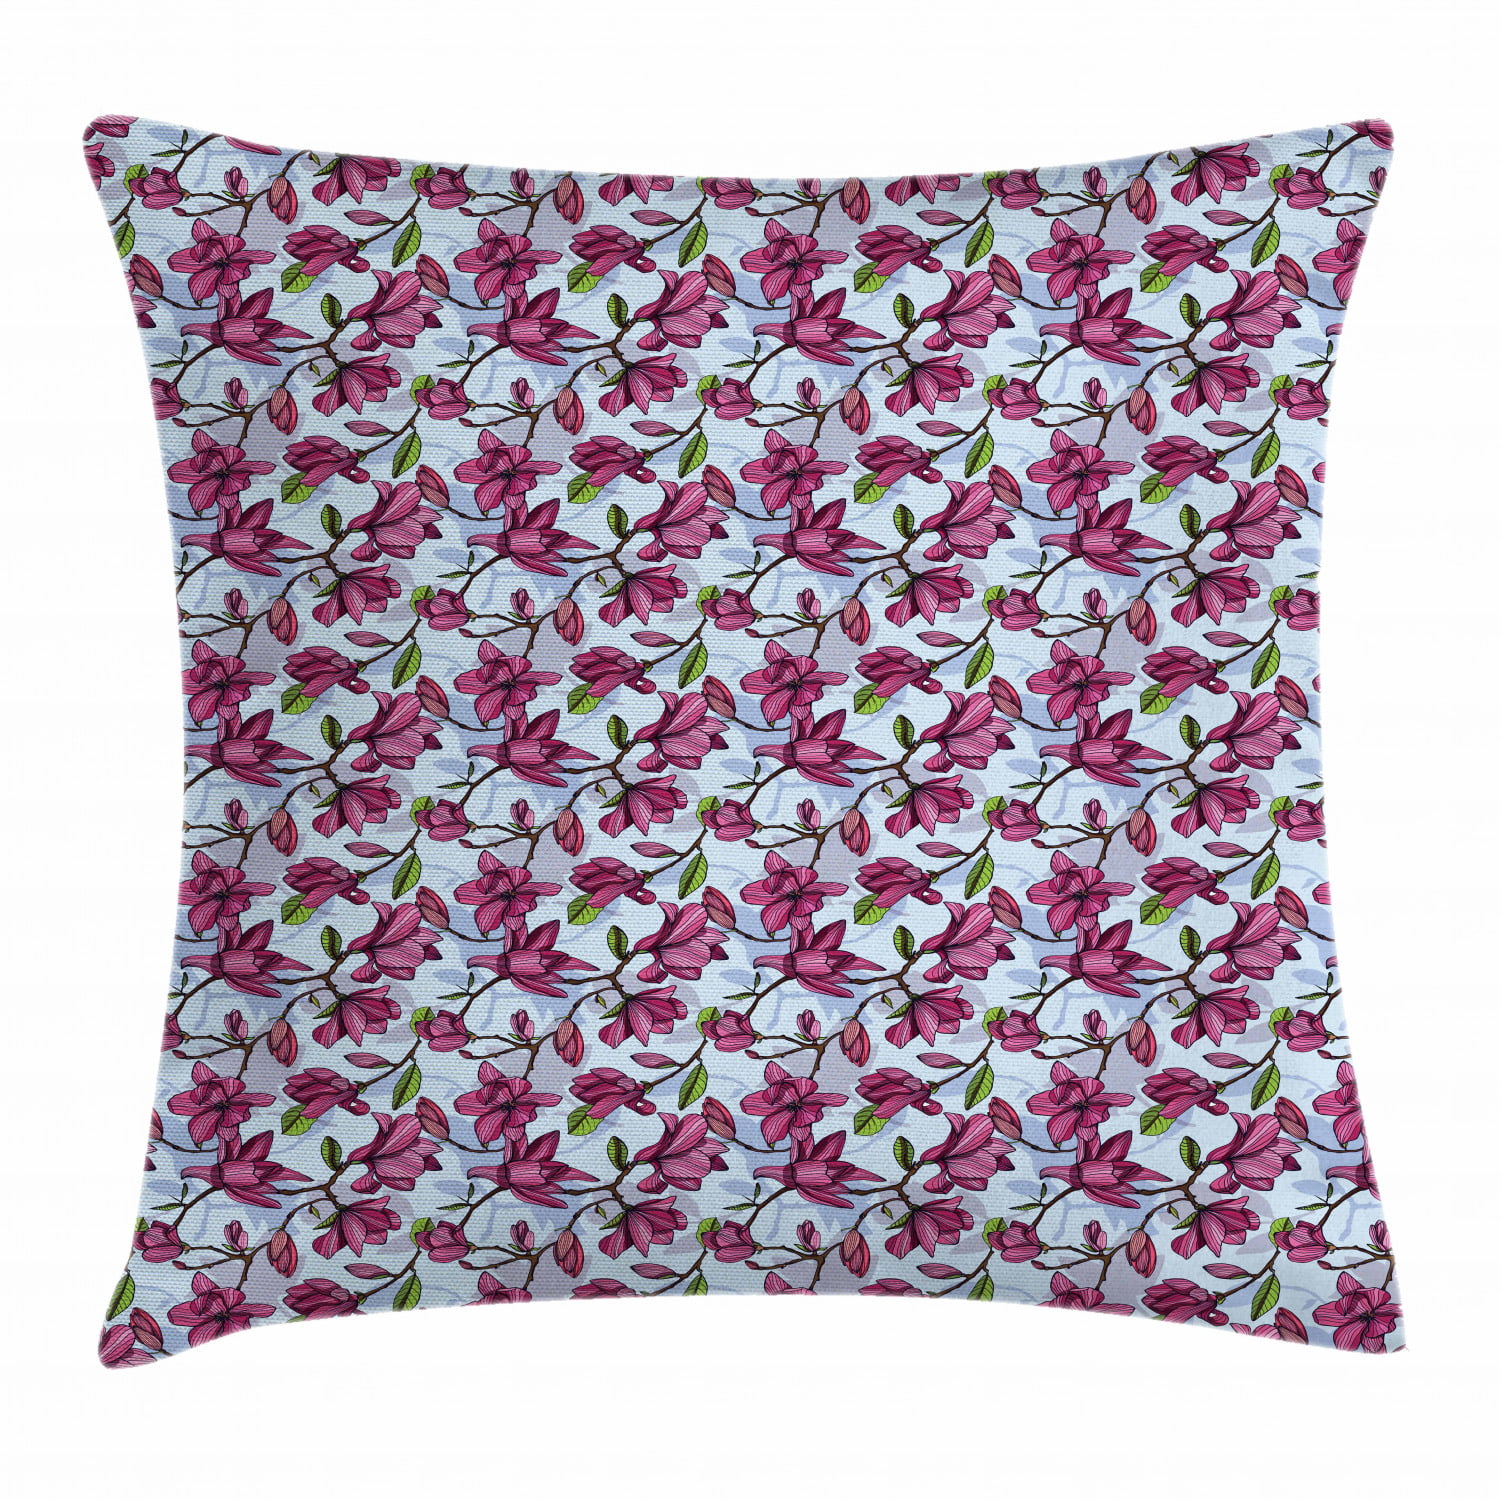 Cushion Cover in Next Purple Magnolia 16" Matches Curtains 